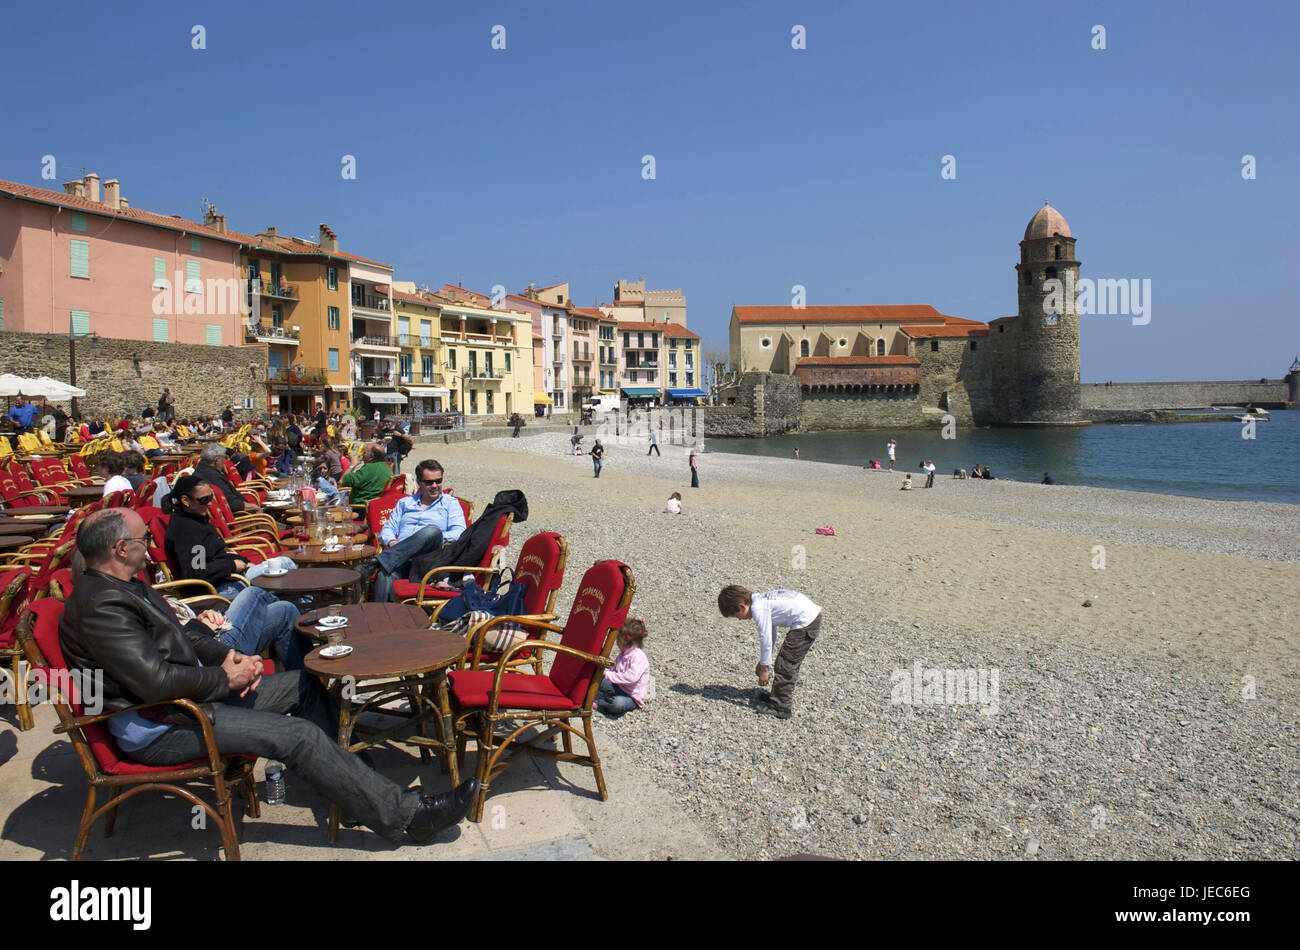 Europe, France, Collioure, tourist in a beach cafe, Stock Photo